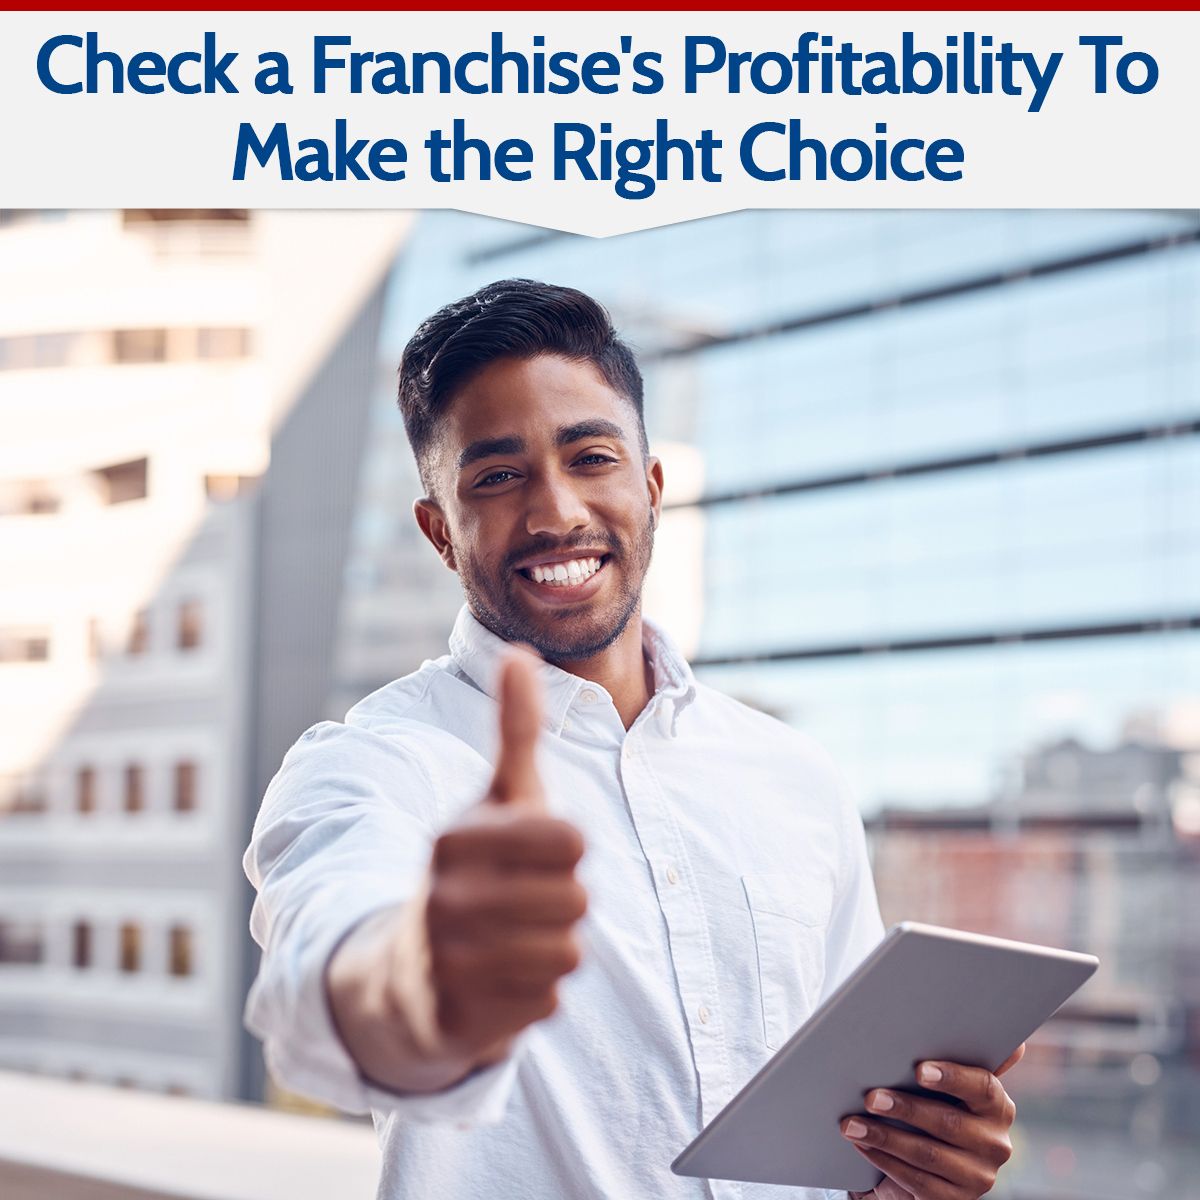 Check a Franchise's Profitability To Make the Right Choice